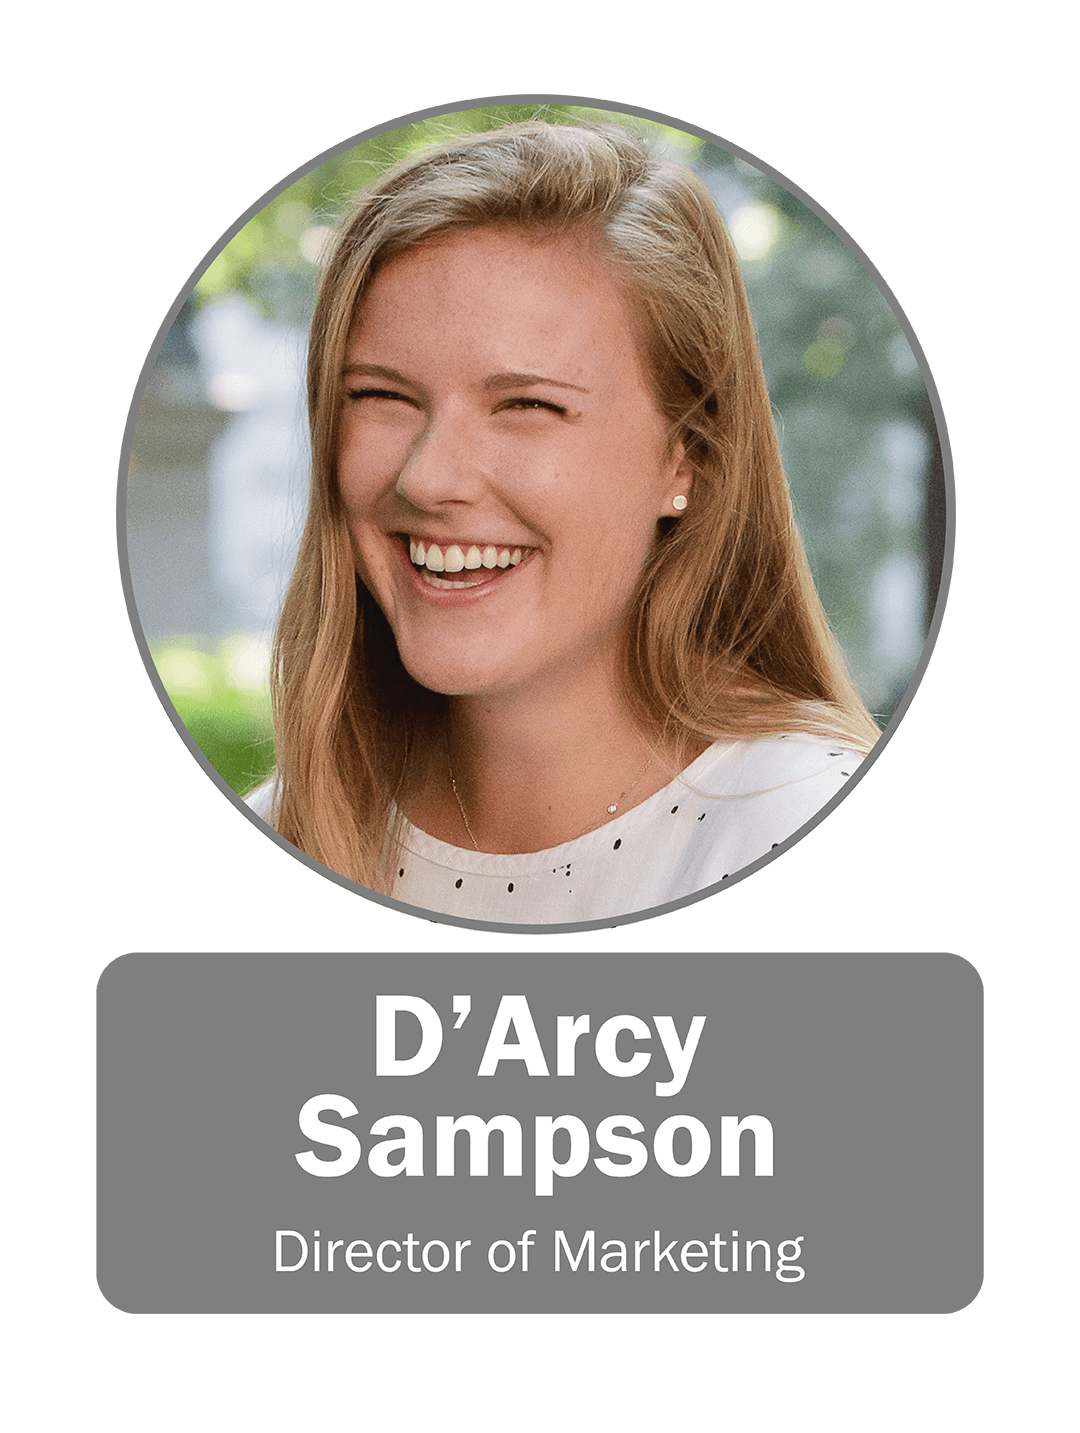 D'Arcy Sampson | Director of Marketing